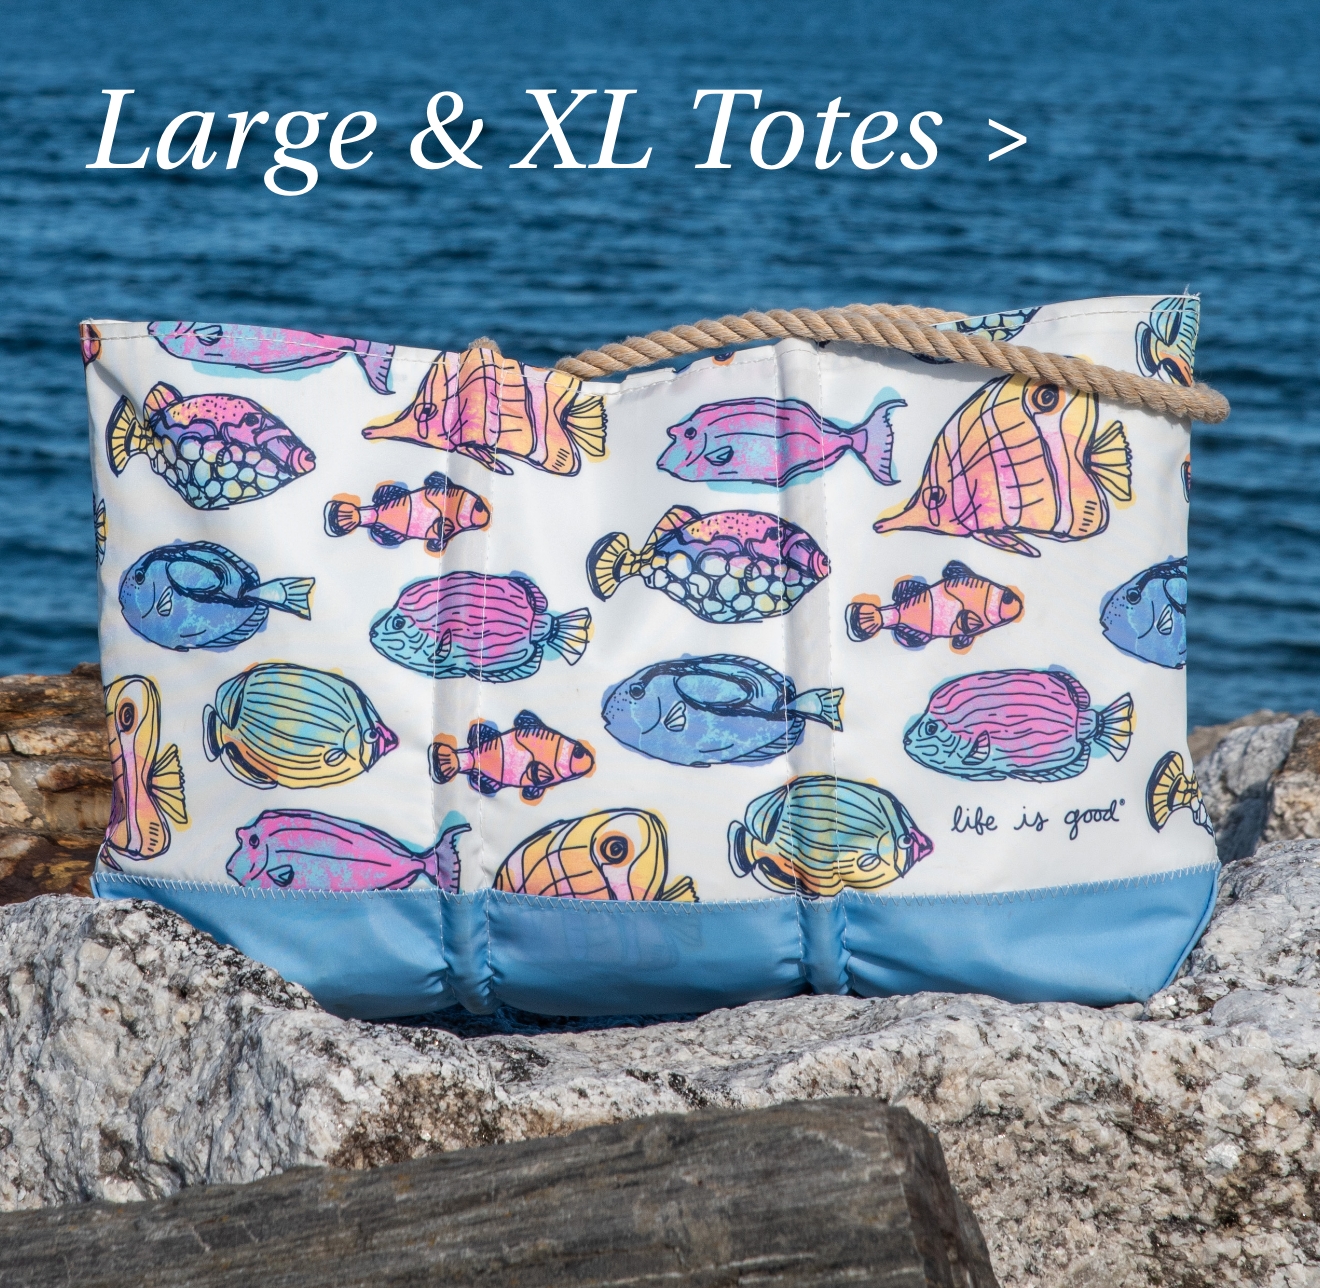 Large and XL Totes